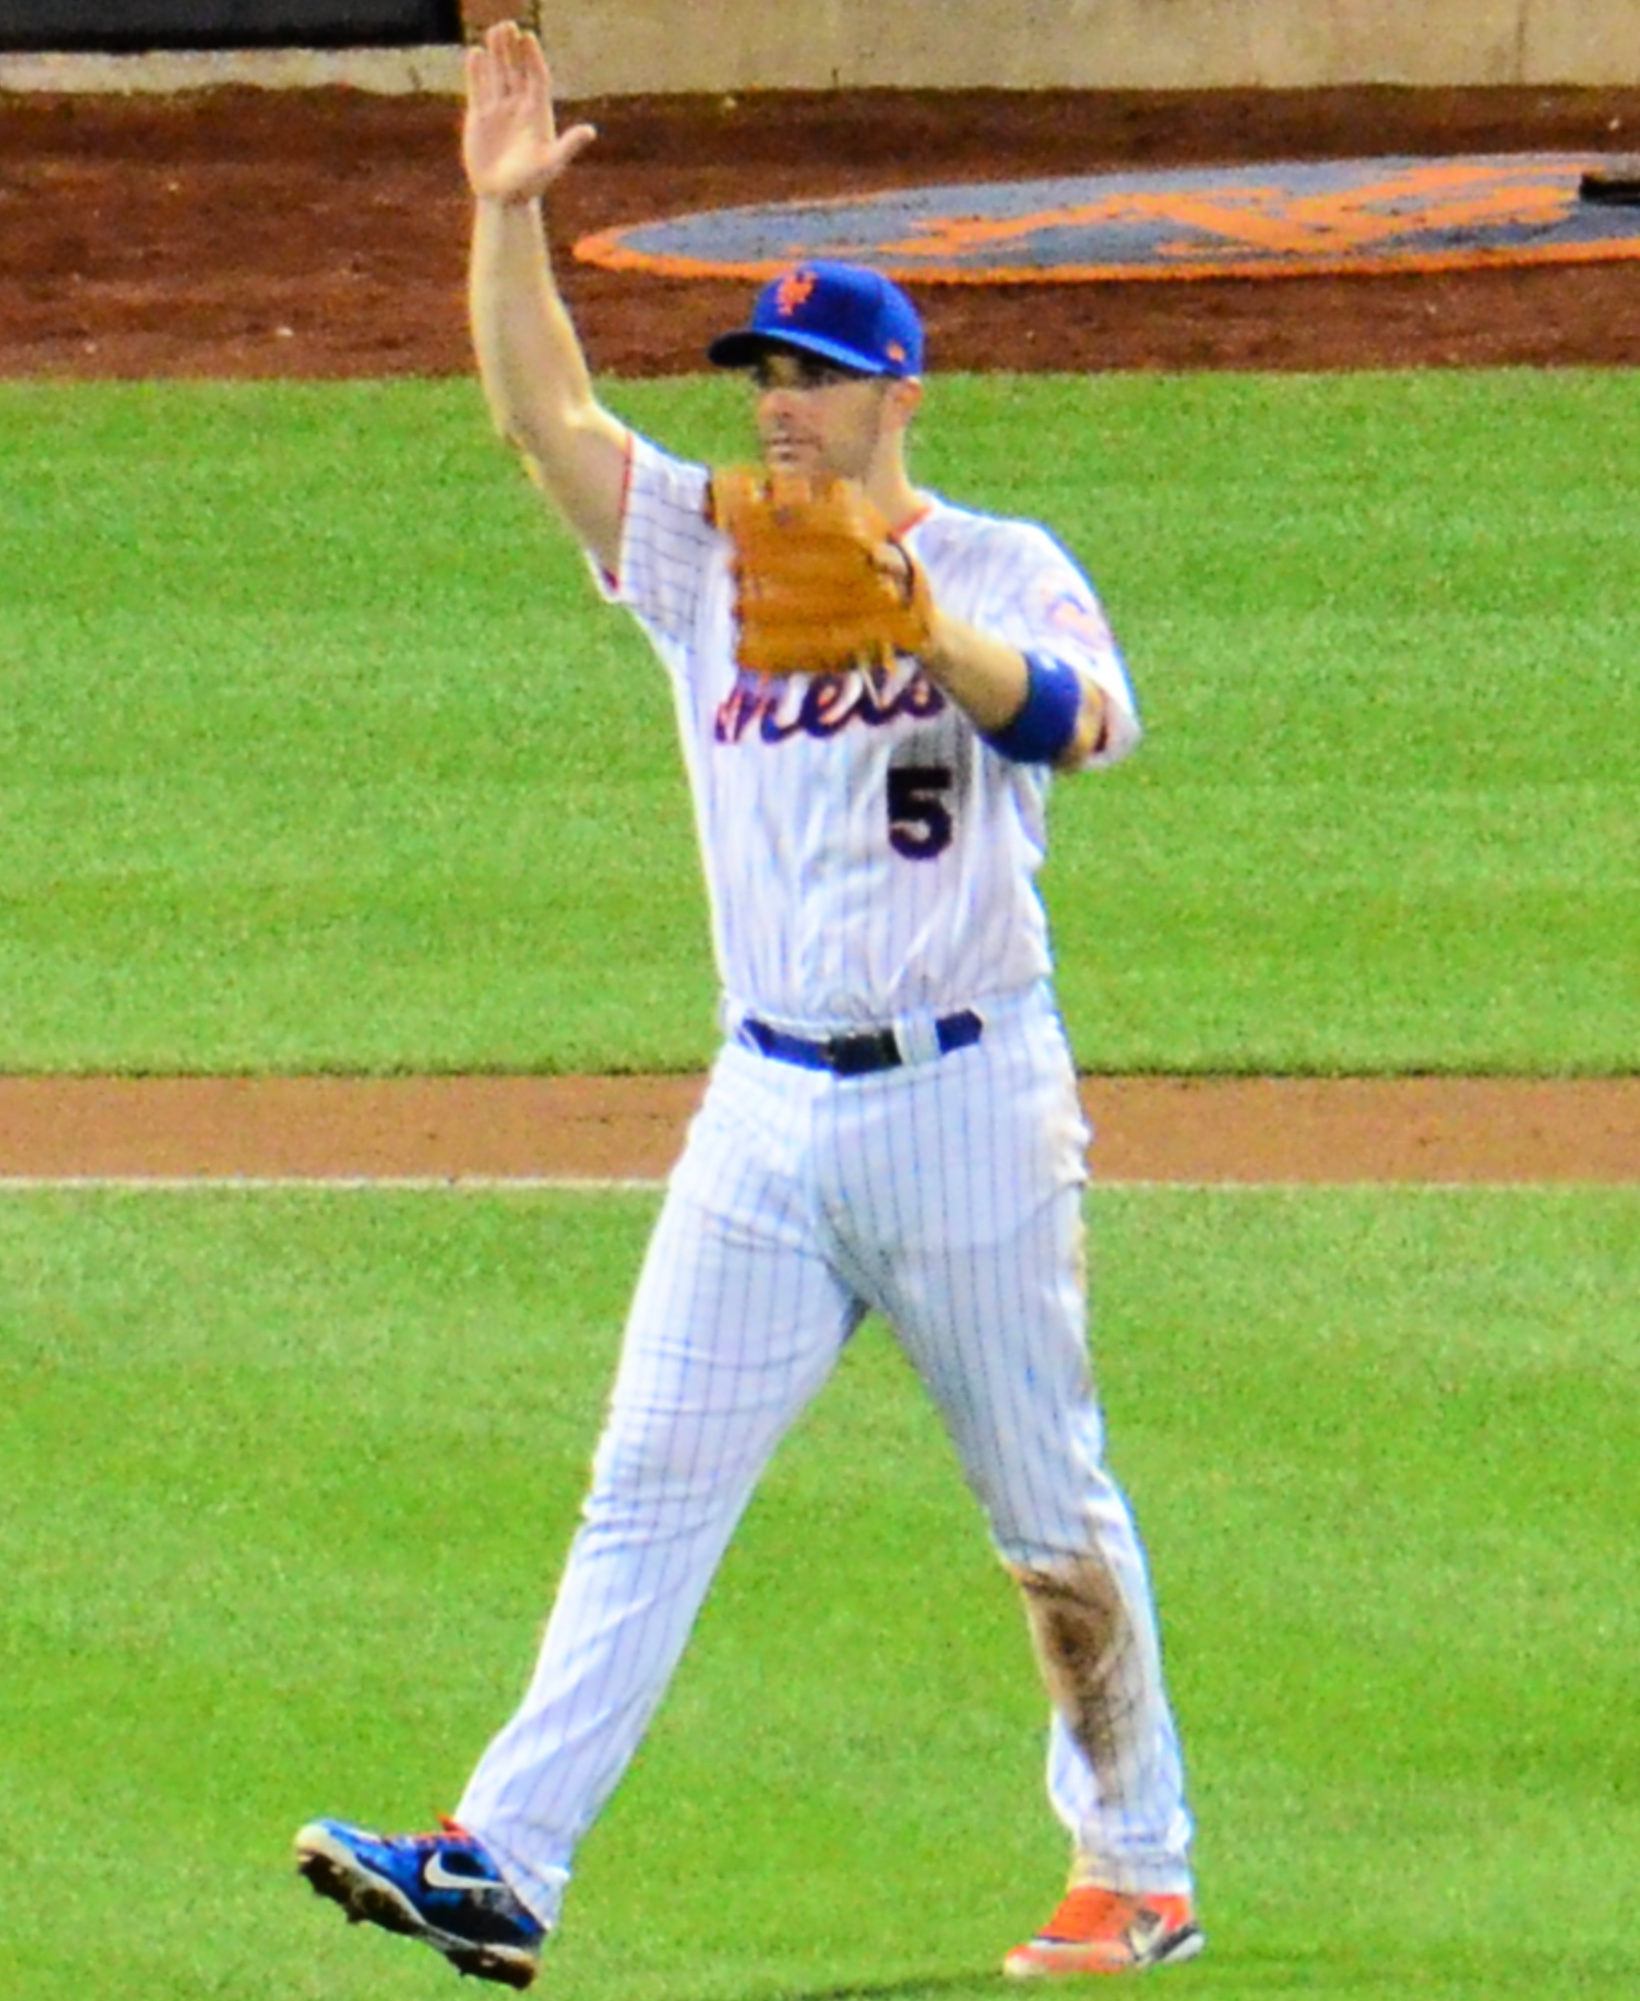 File:David Wright Leaving the Game (30064424537) (cropped).jpg - Wikipedia